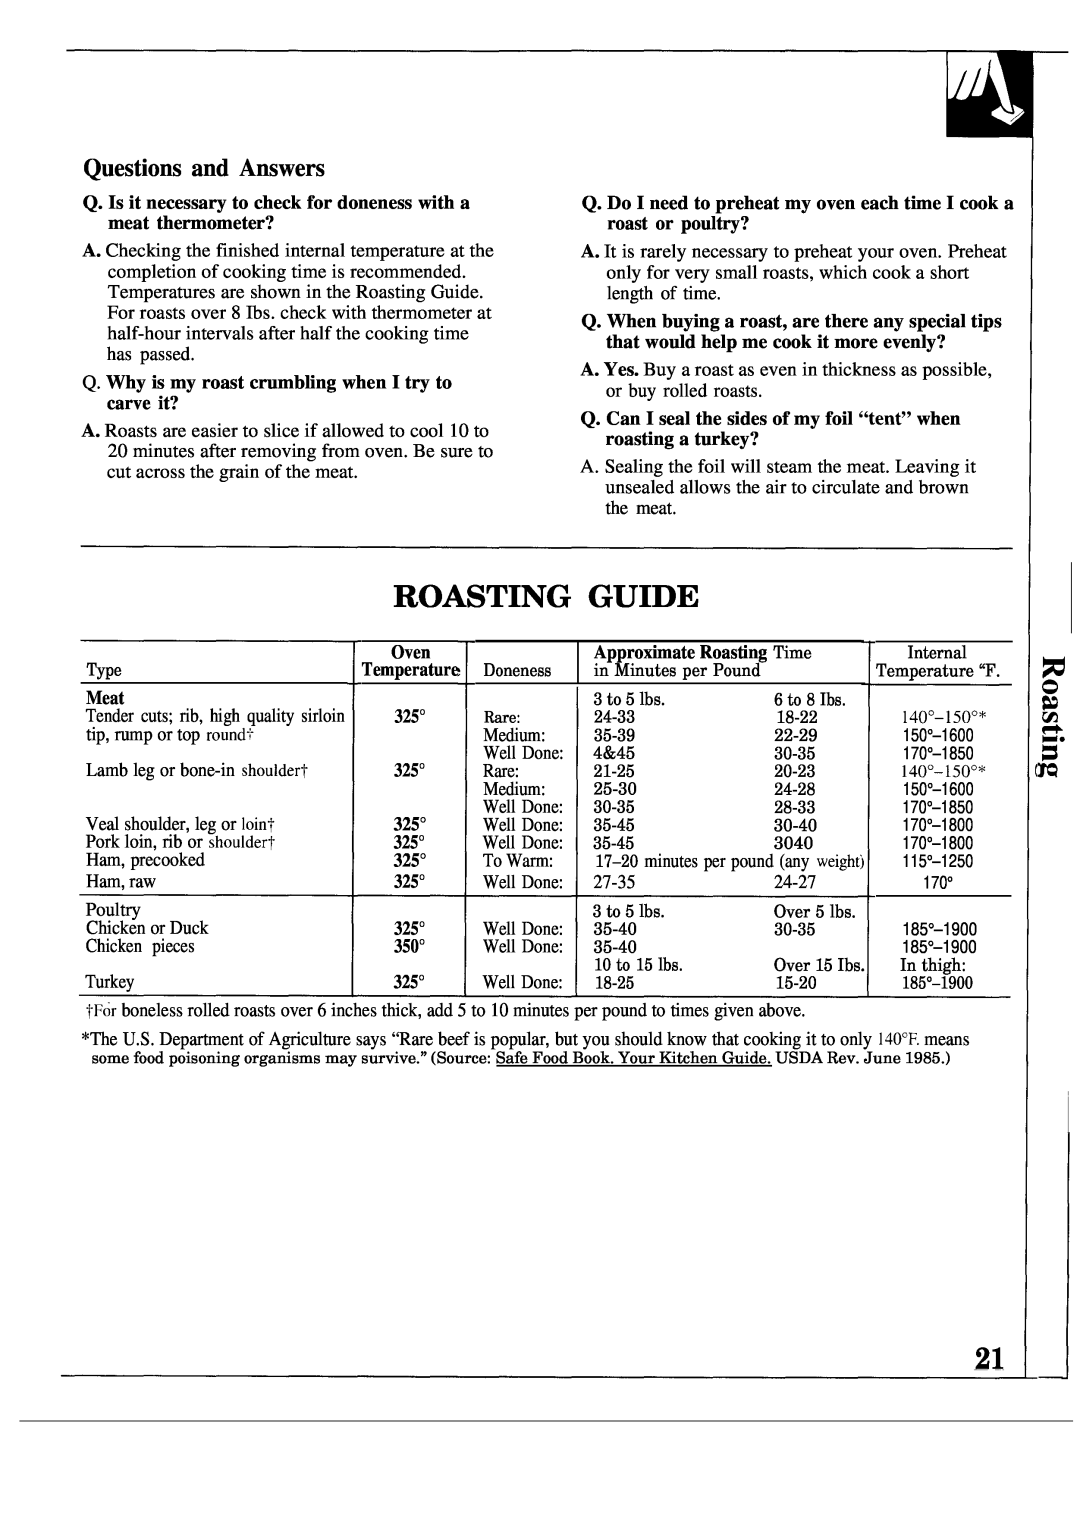 GE JGSP21GER, JGSP20GER operating instructions Roasting Guide, Questions and Answers, Oven, Approximate Roasting Time, Meat 